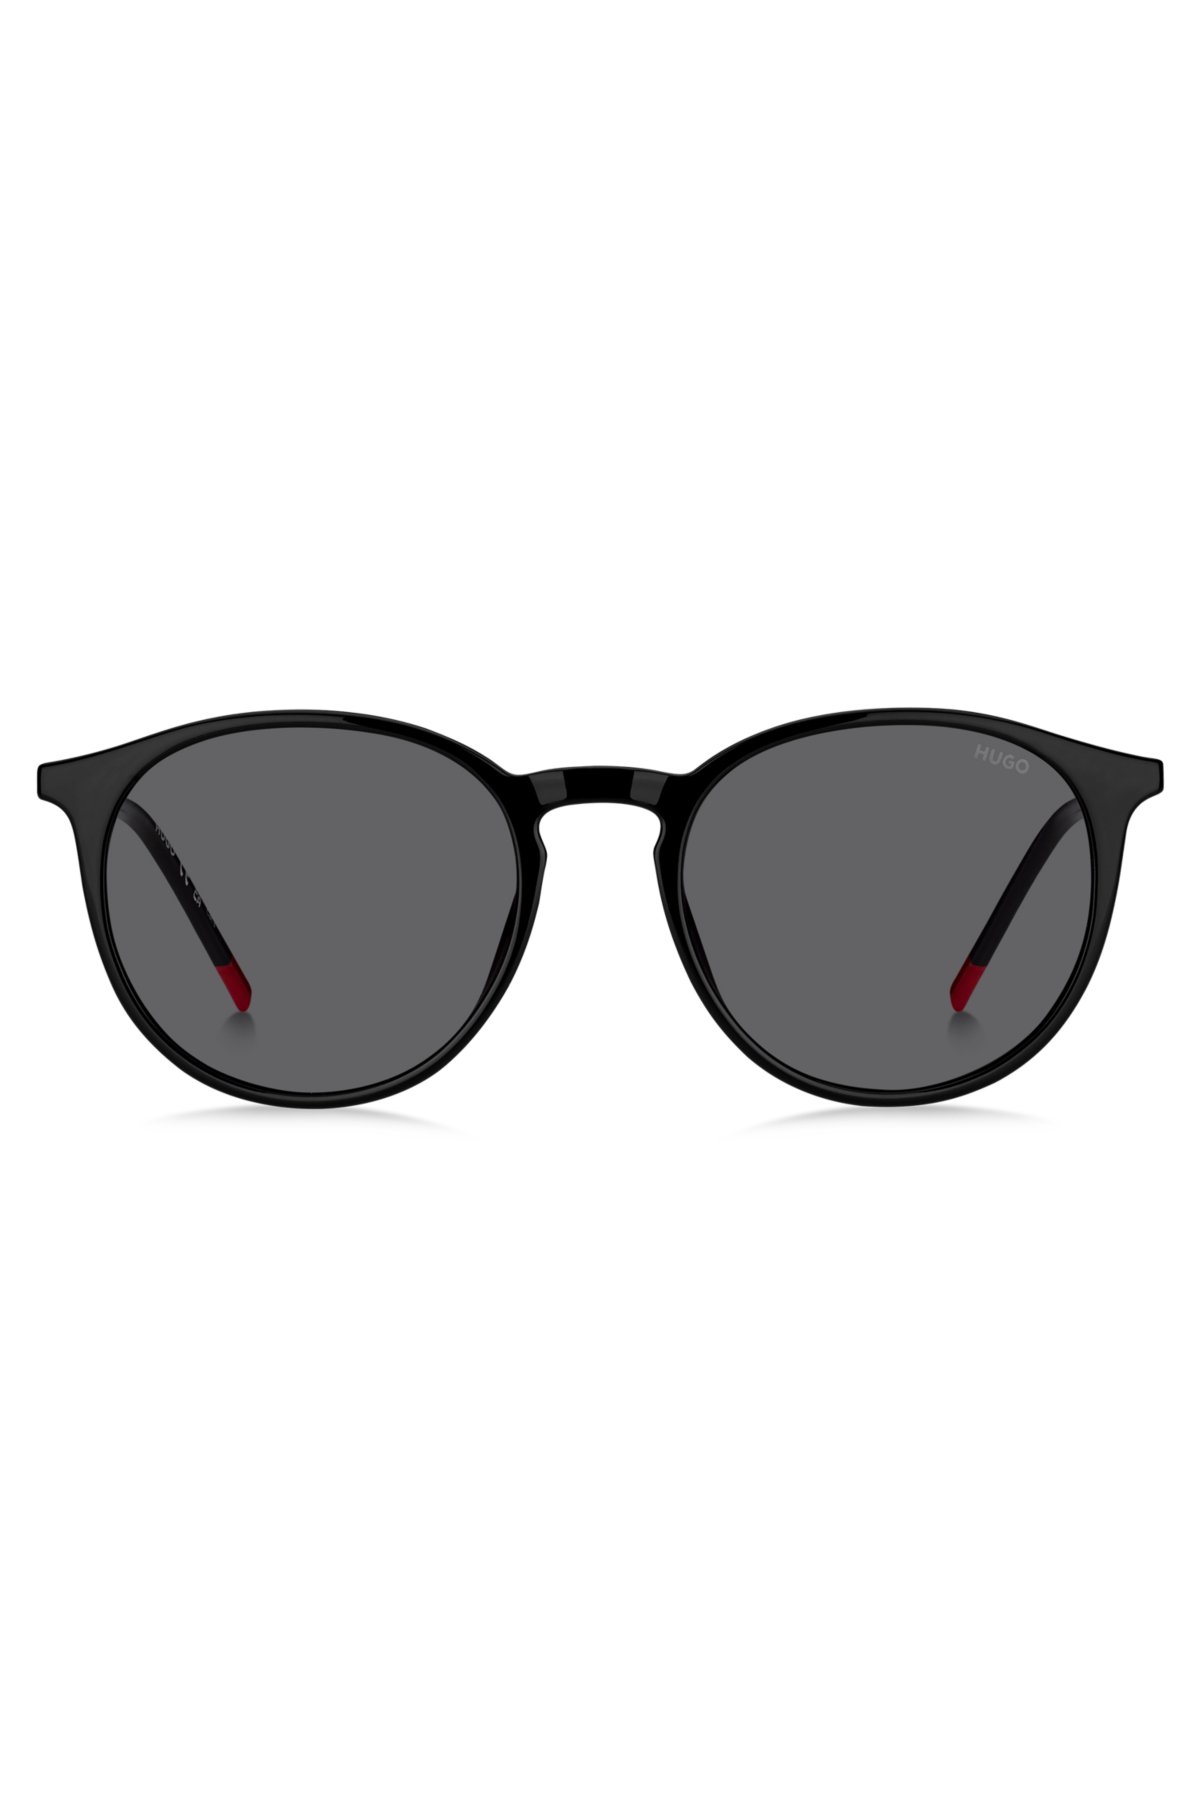 Black sunglasses with signature end-tips, Black